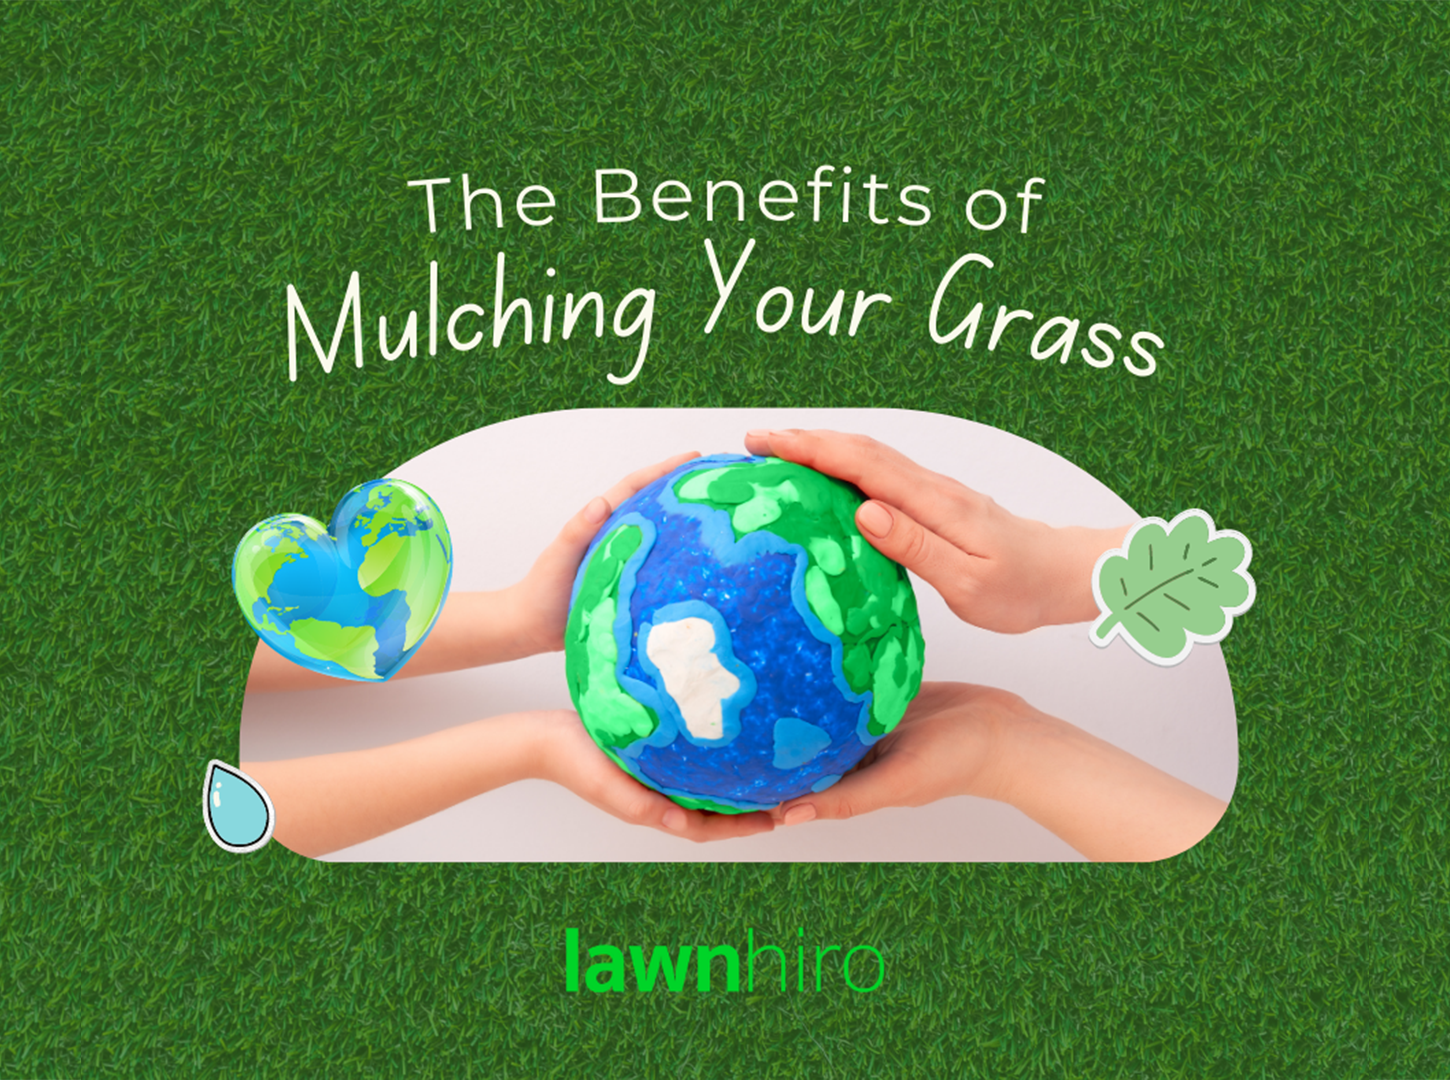 Featured image for “The Benefits of Mulching Your Grass”